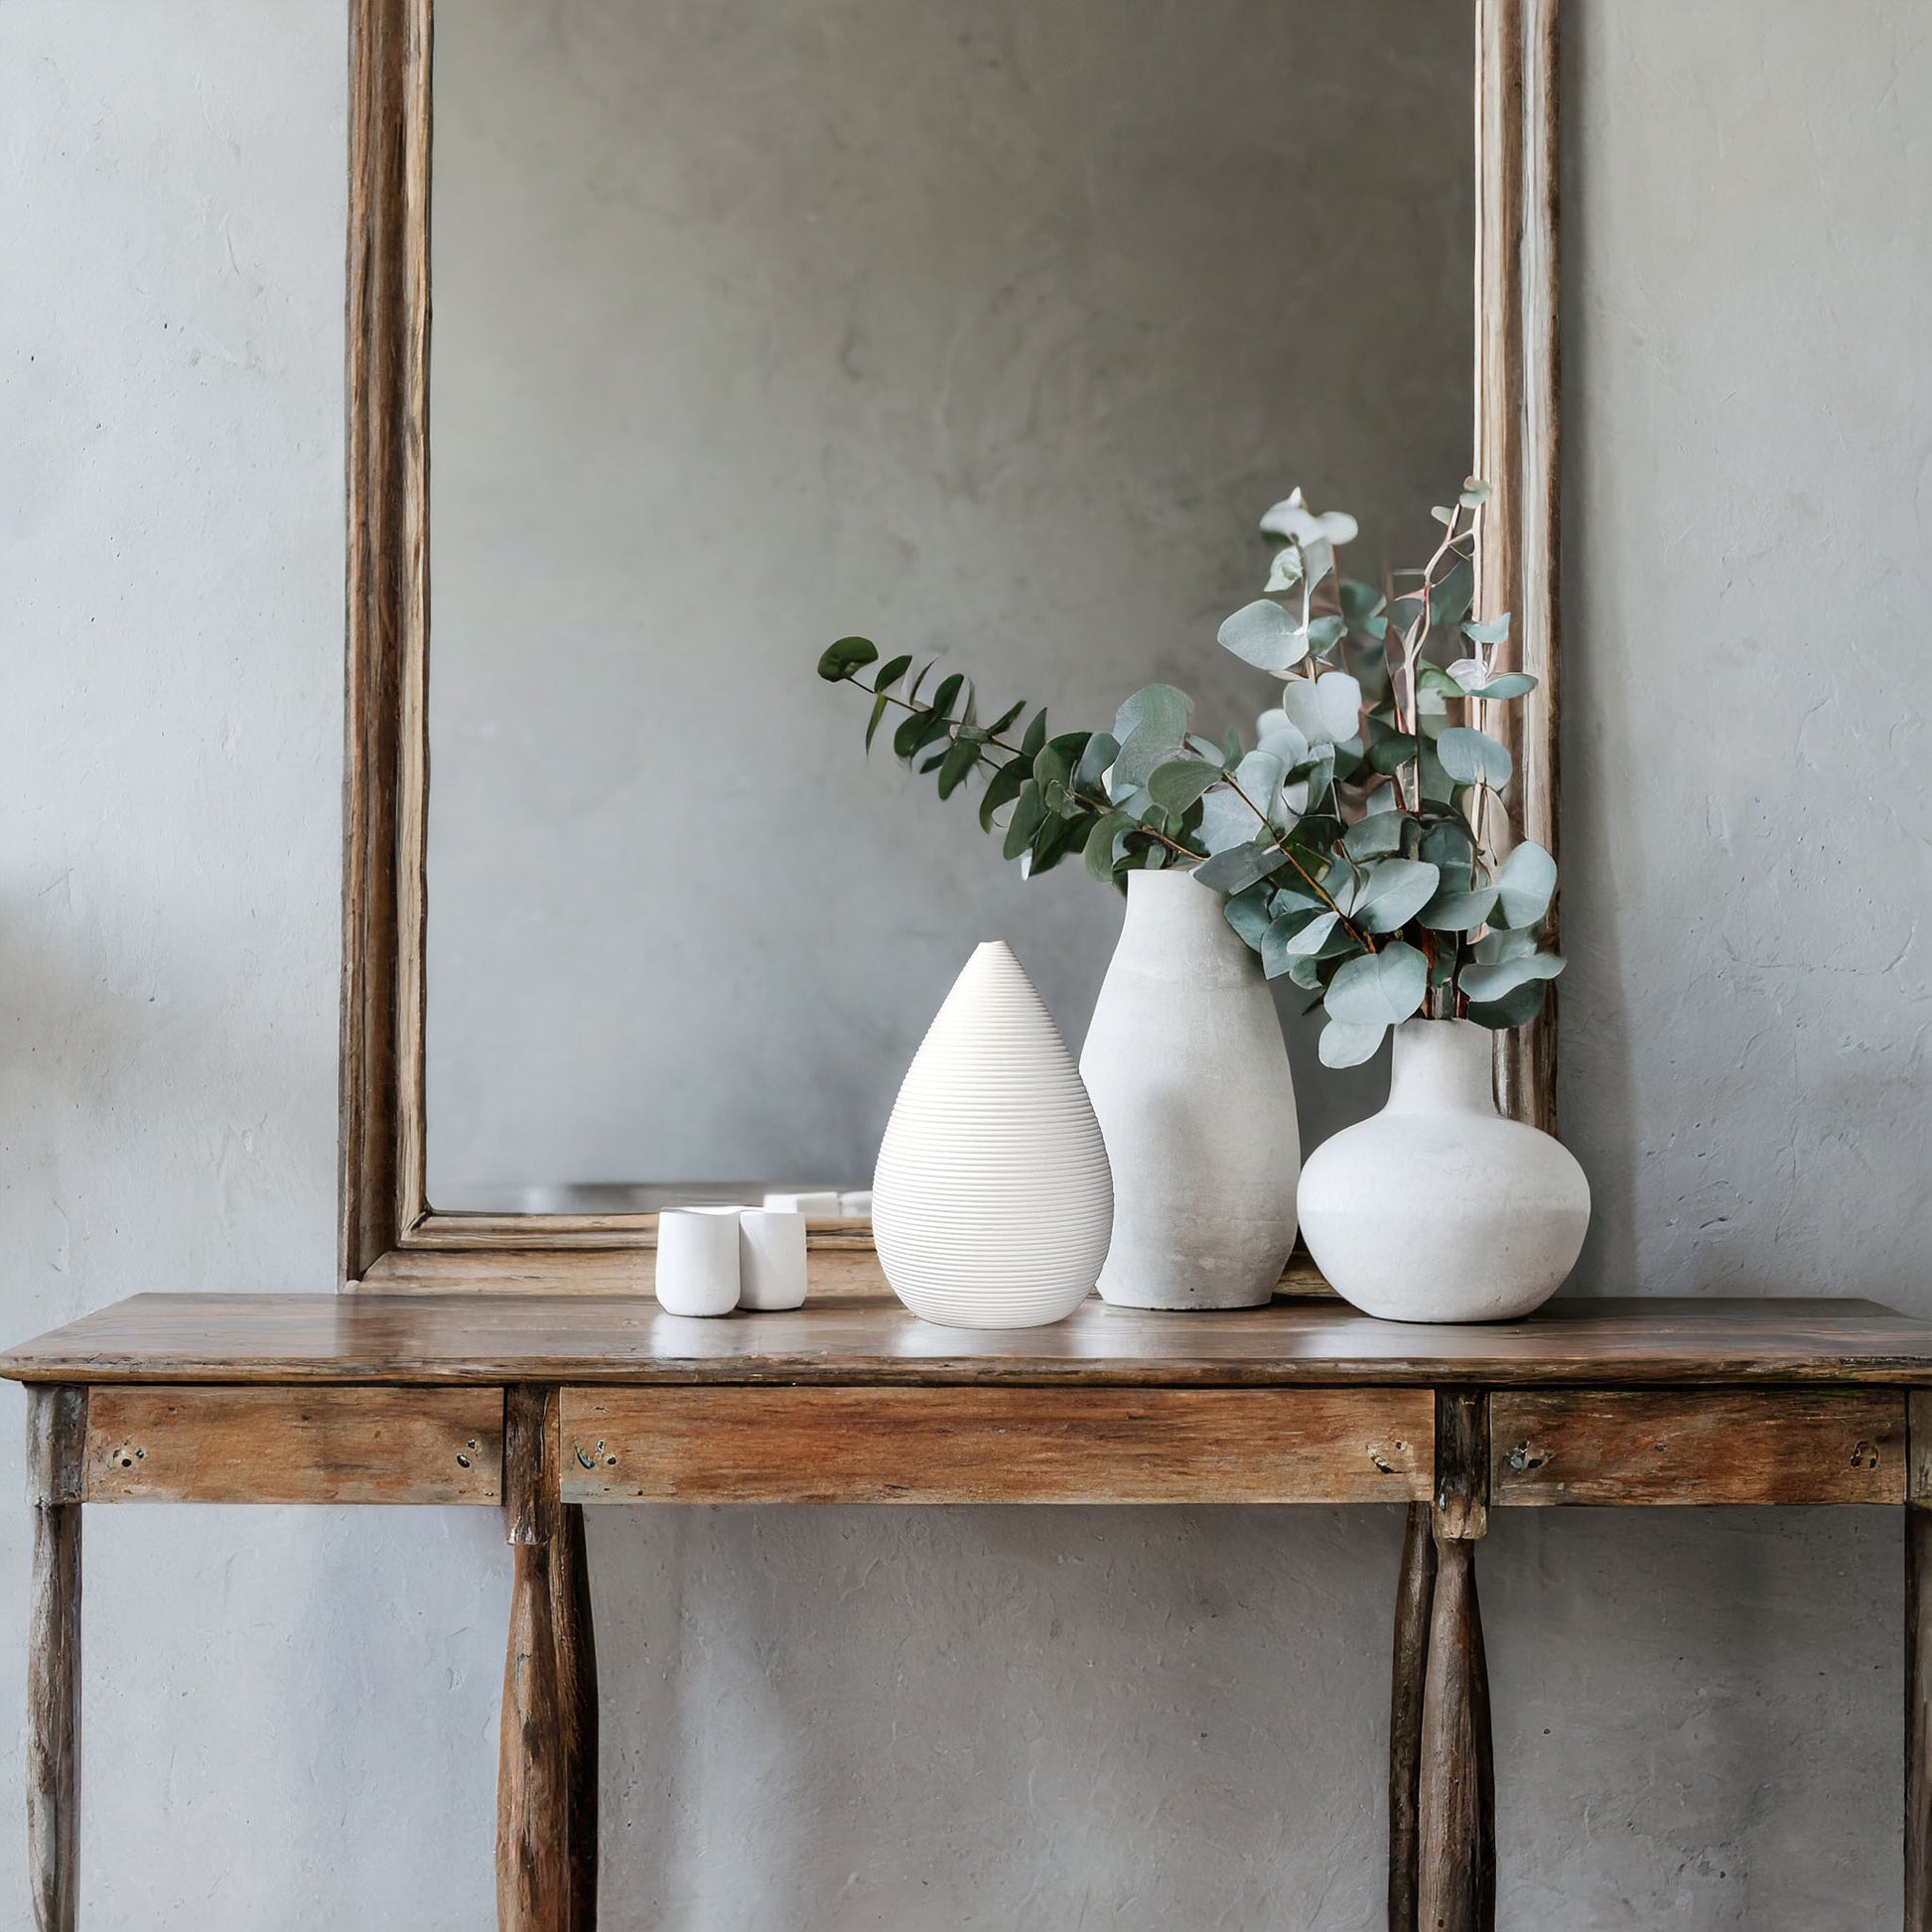 Tapered ribbed white ceramic vase on wood console table with white vases and mirror.